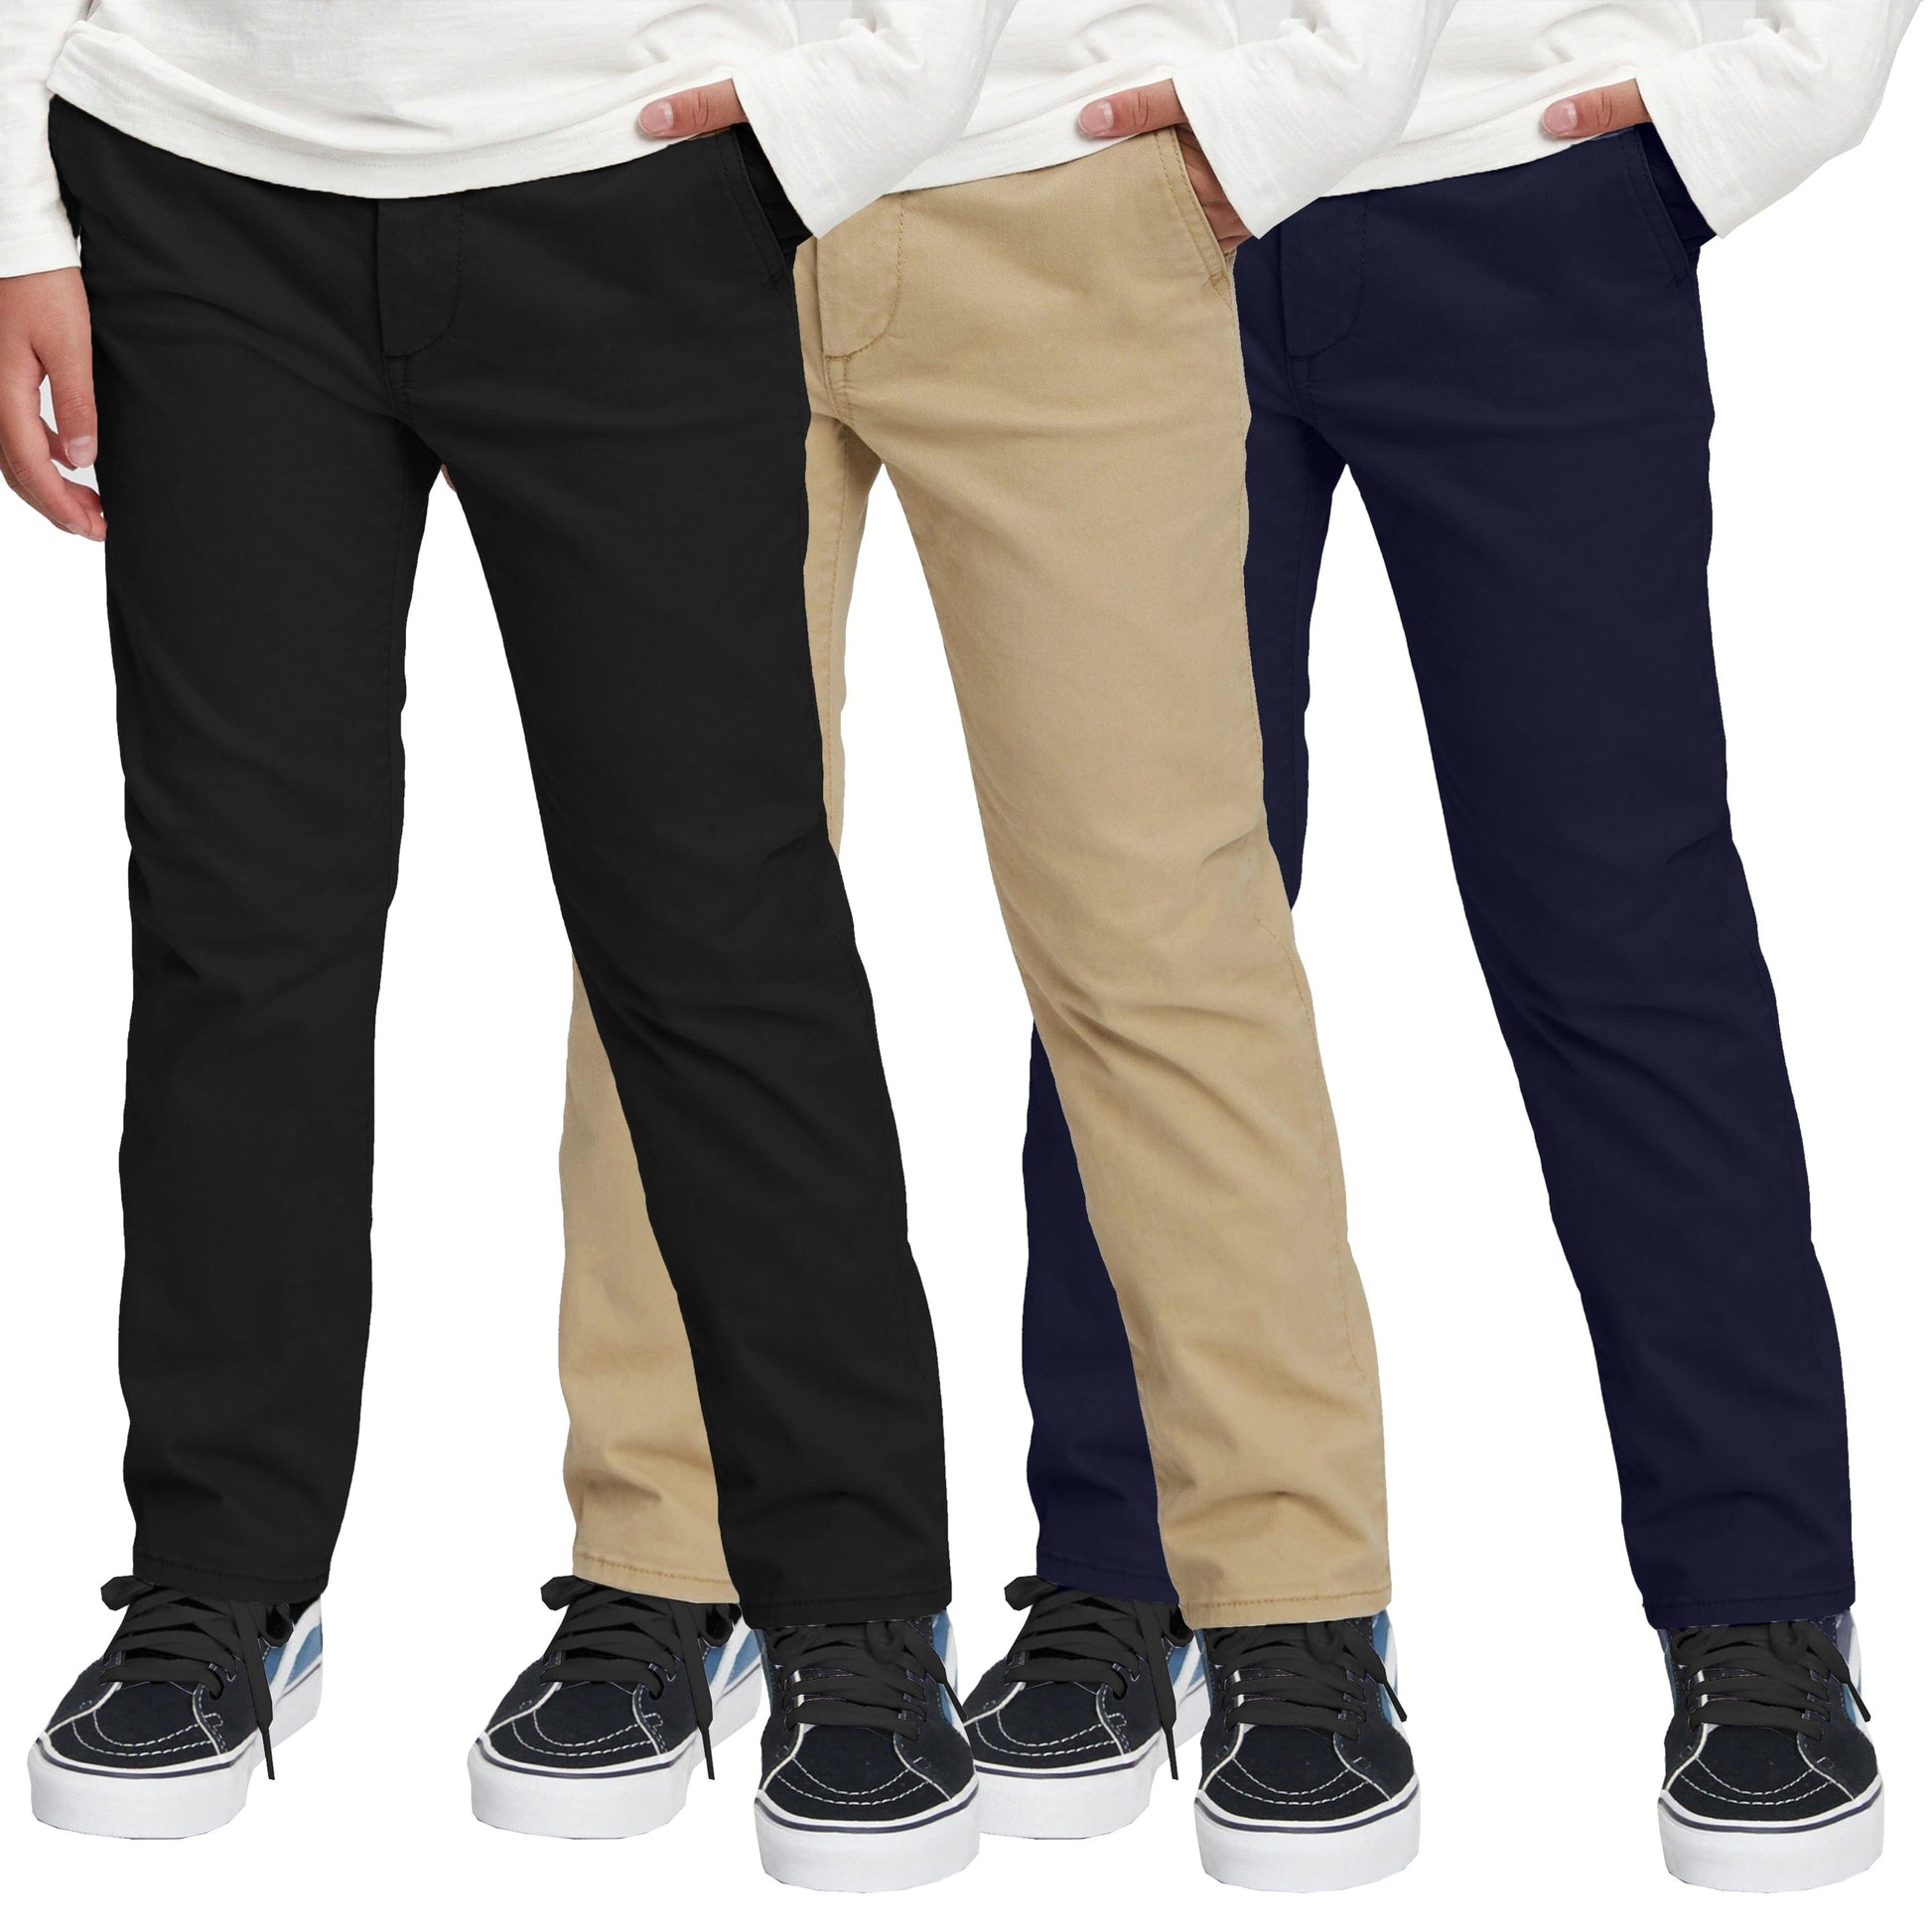 School Uniforms Juniors Everyday Skinny Pants-Flat Front with Stretch  Fabric. Slim and Sleek. Modern Fit for an Excellent Fit